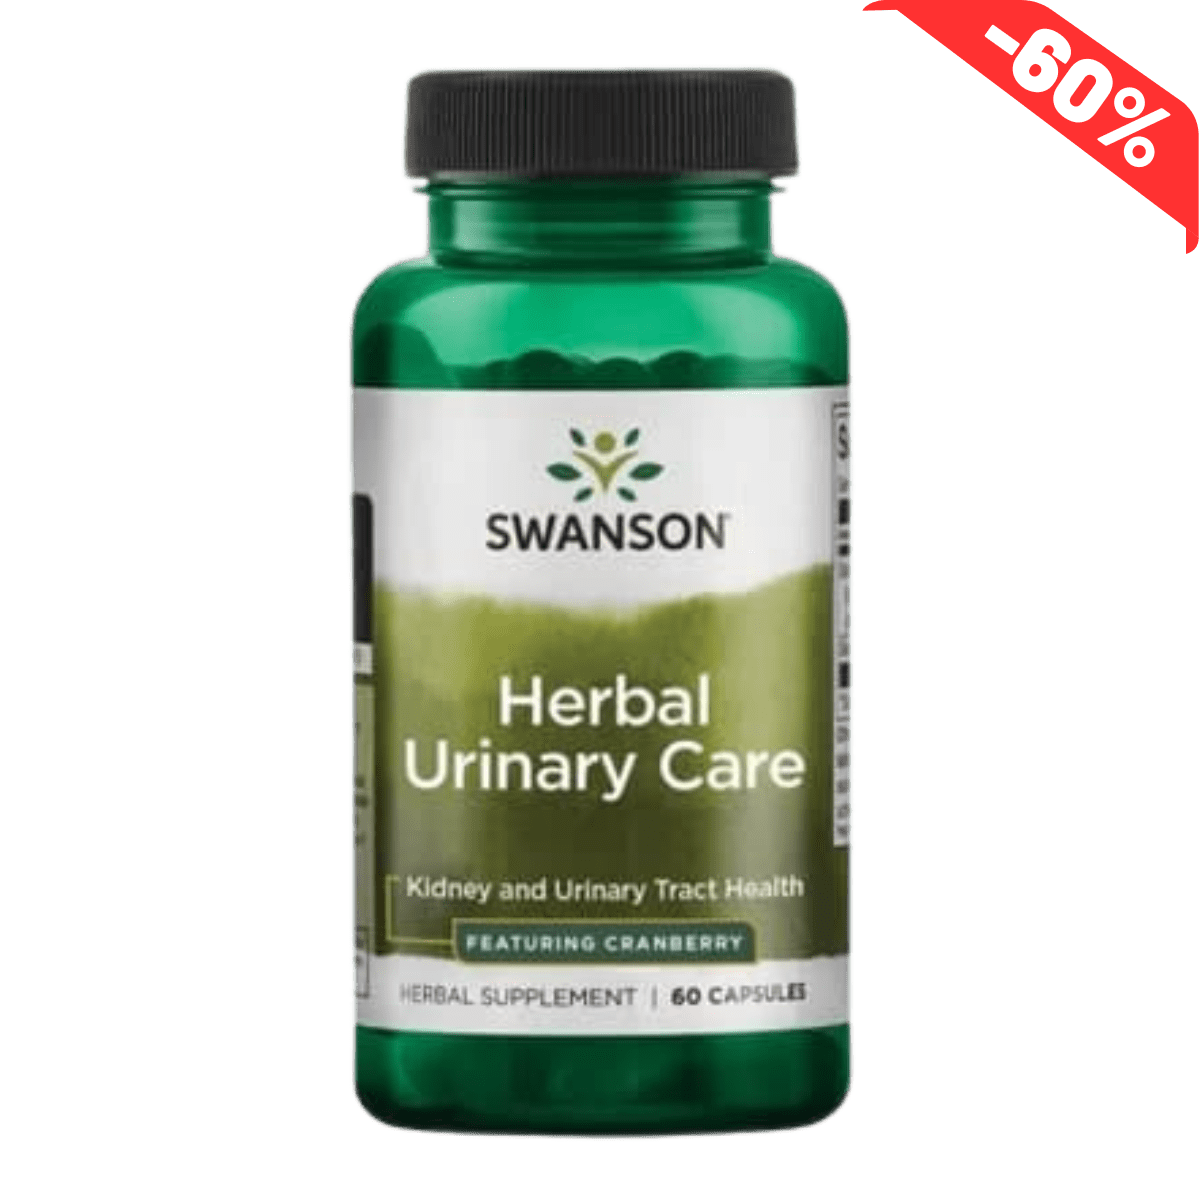 Swanson Herbal Urinary Care | Muscle Freak